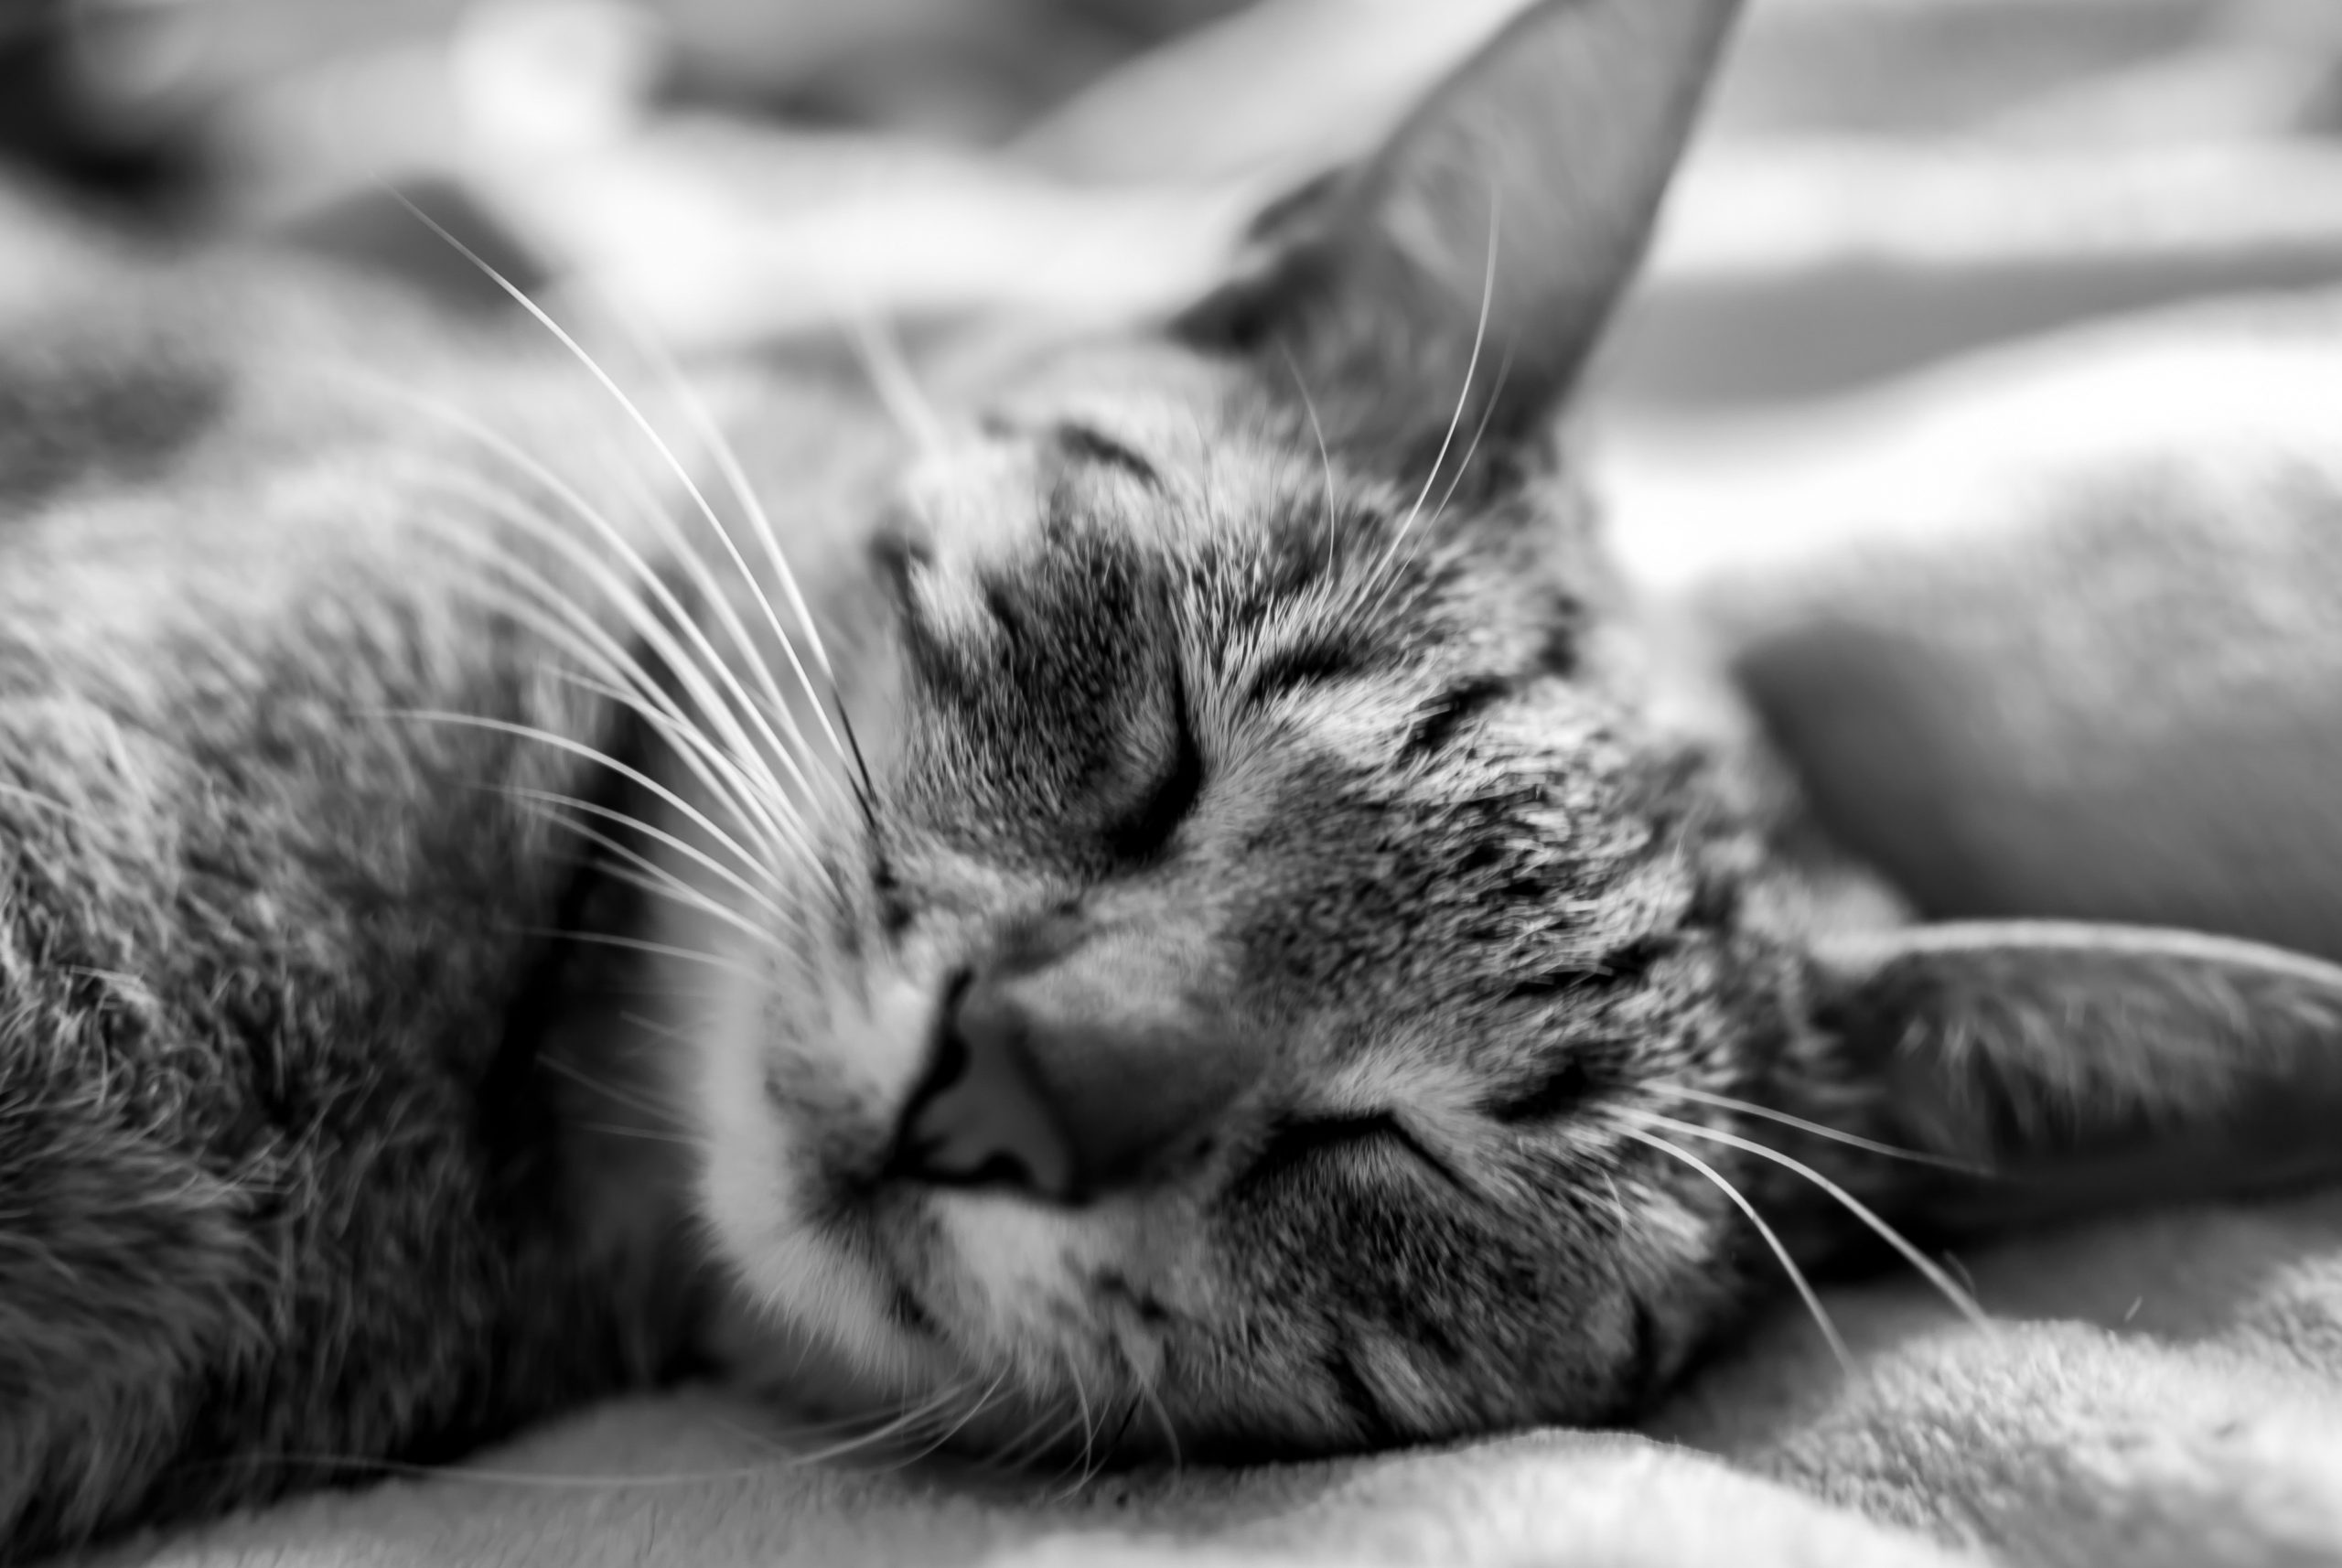 black and white image of a sleeping cat